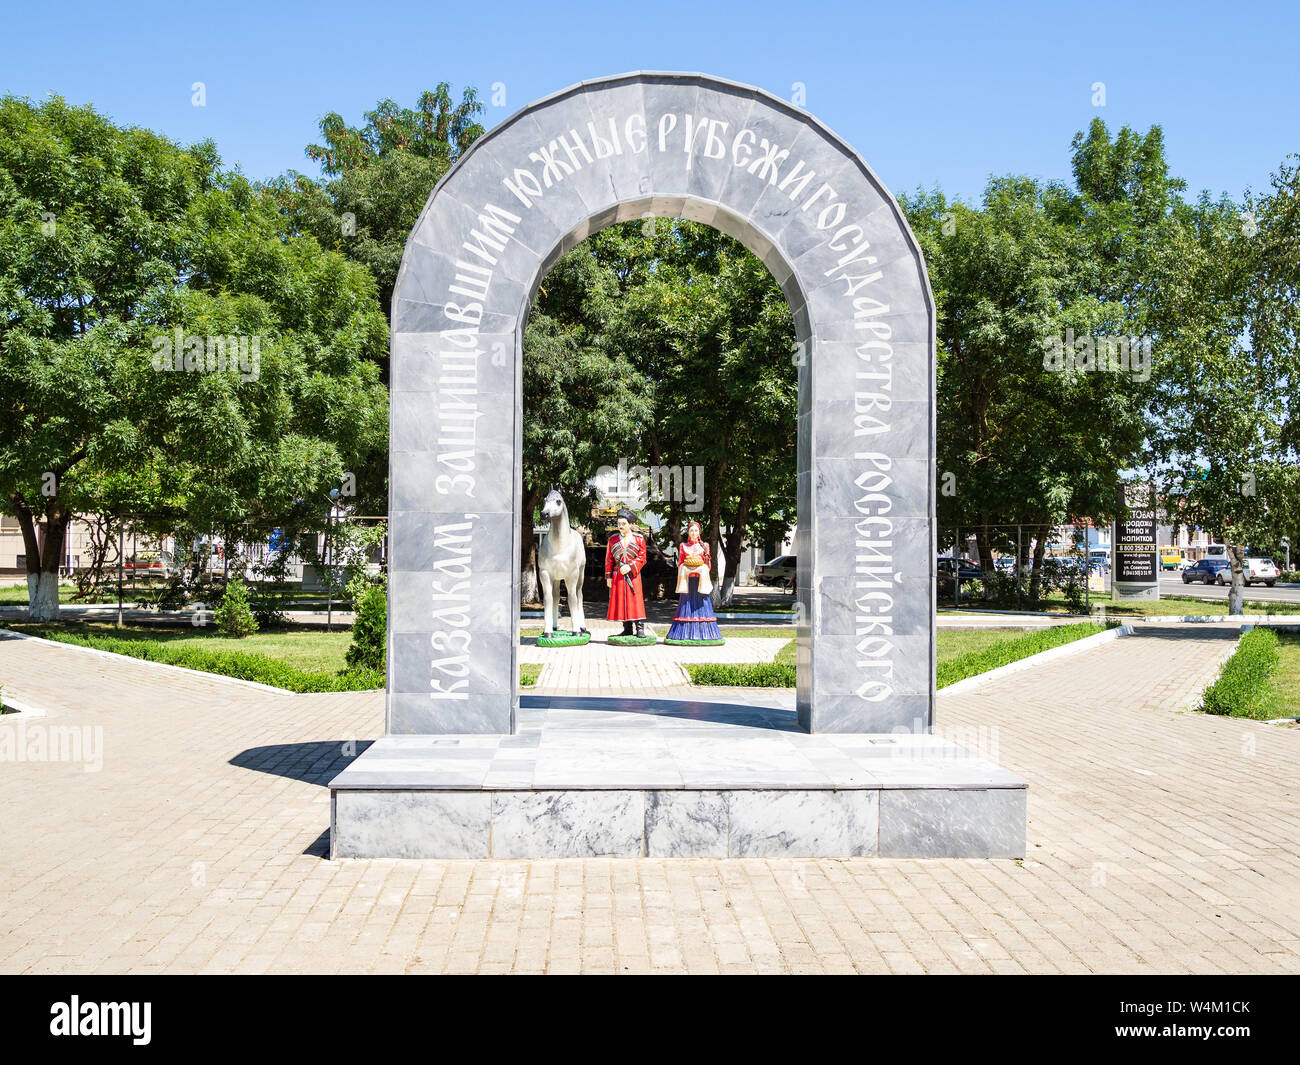 ABINSK, RUSSIA - JULY 2, 2019: Memorial sign to Cossack in honor of the 150th anniversary of the foundation of the Abinsk village settlement in memori Stock Photo